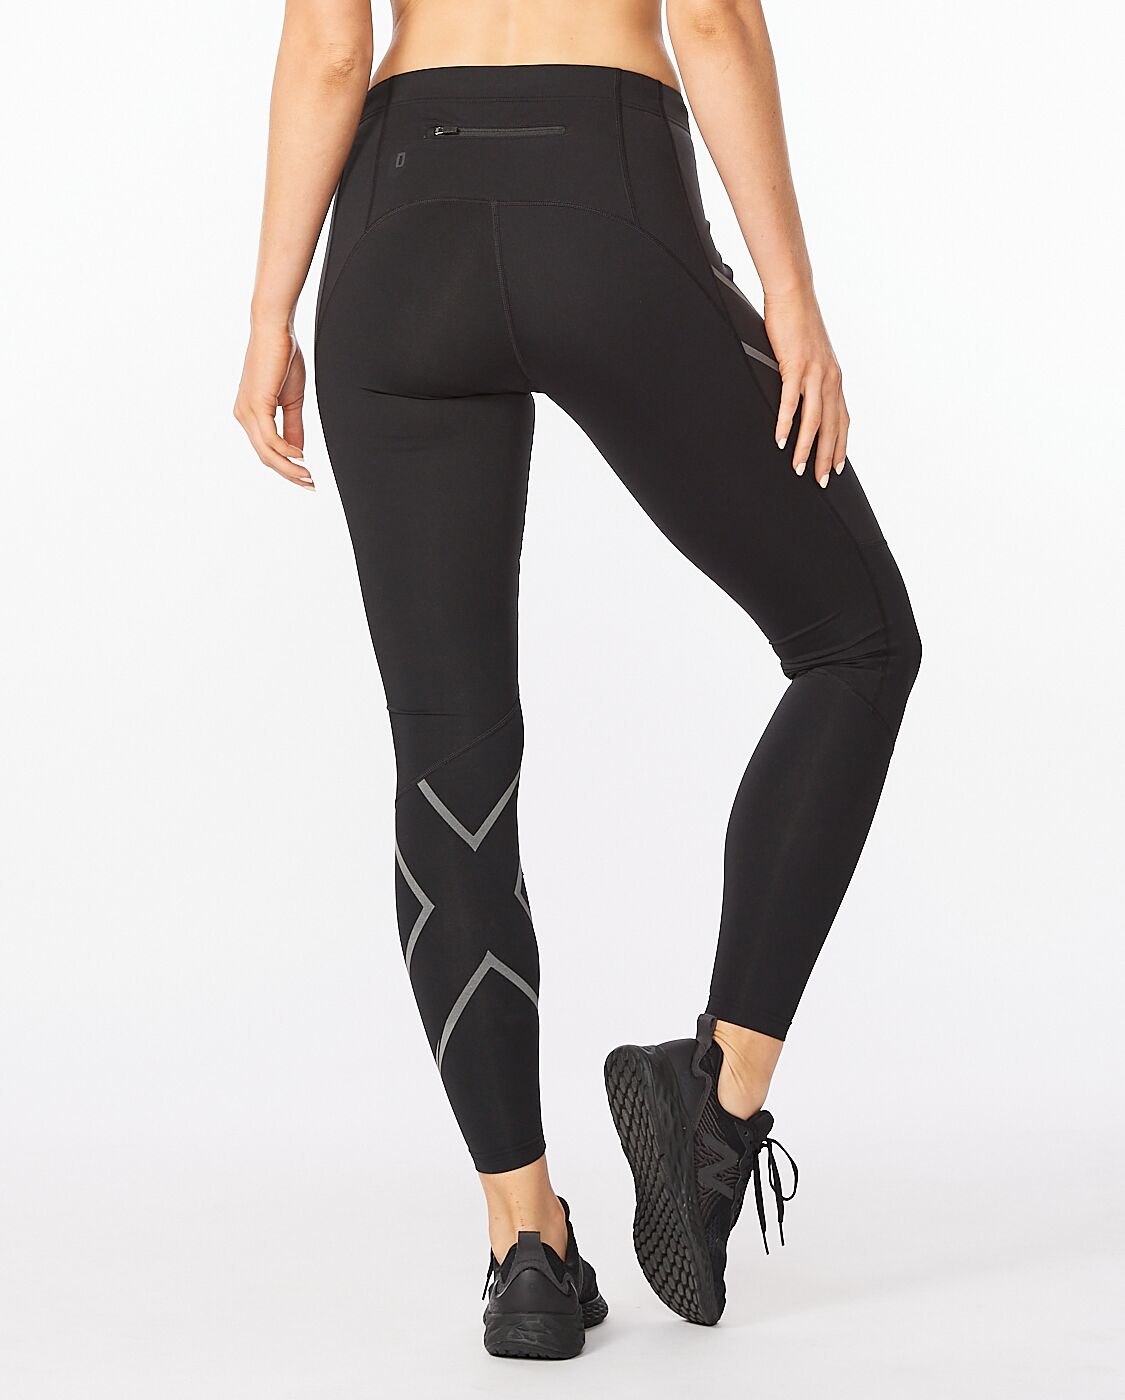 2XU South Africa - Womens Ignition Shield Compression Tights - Black/Black Reflective